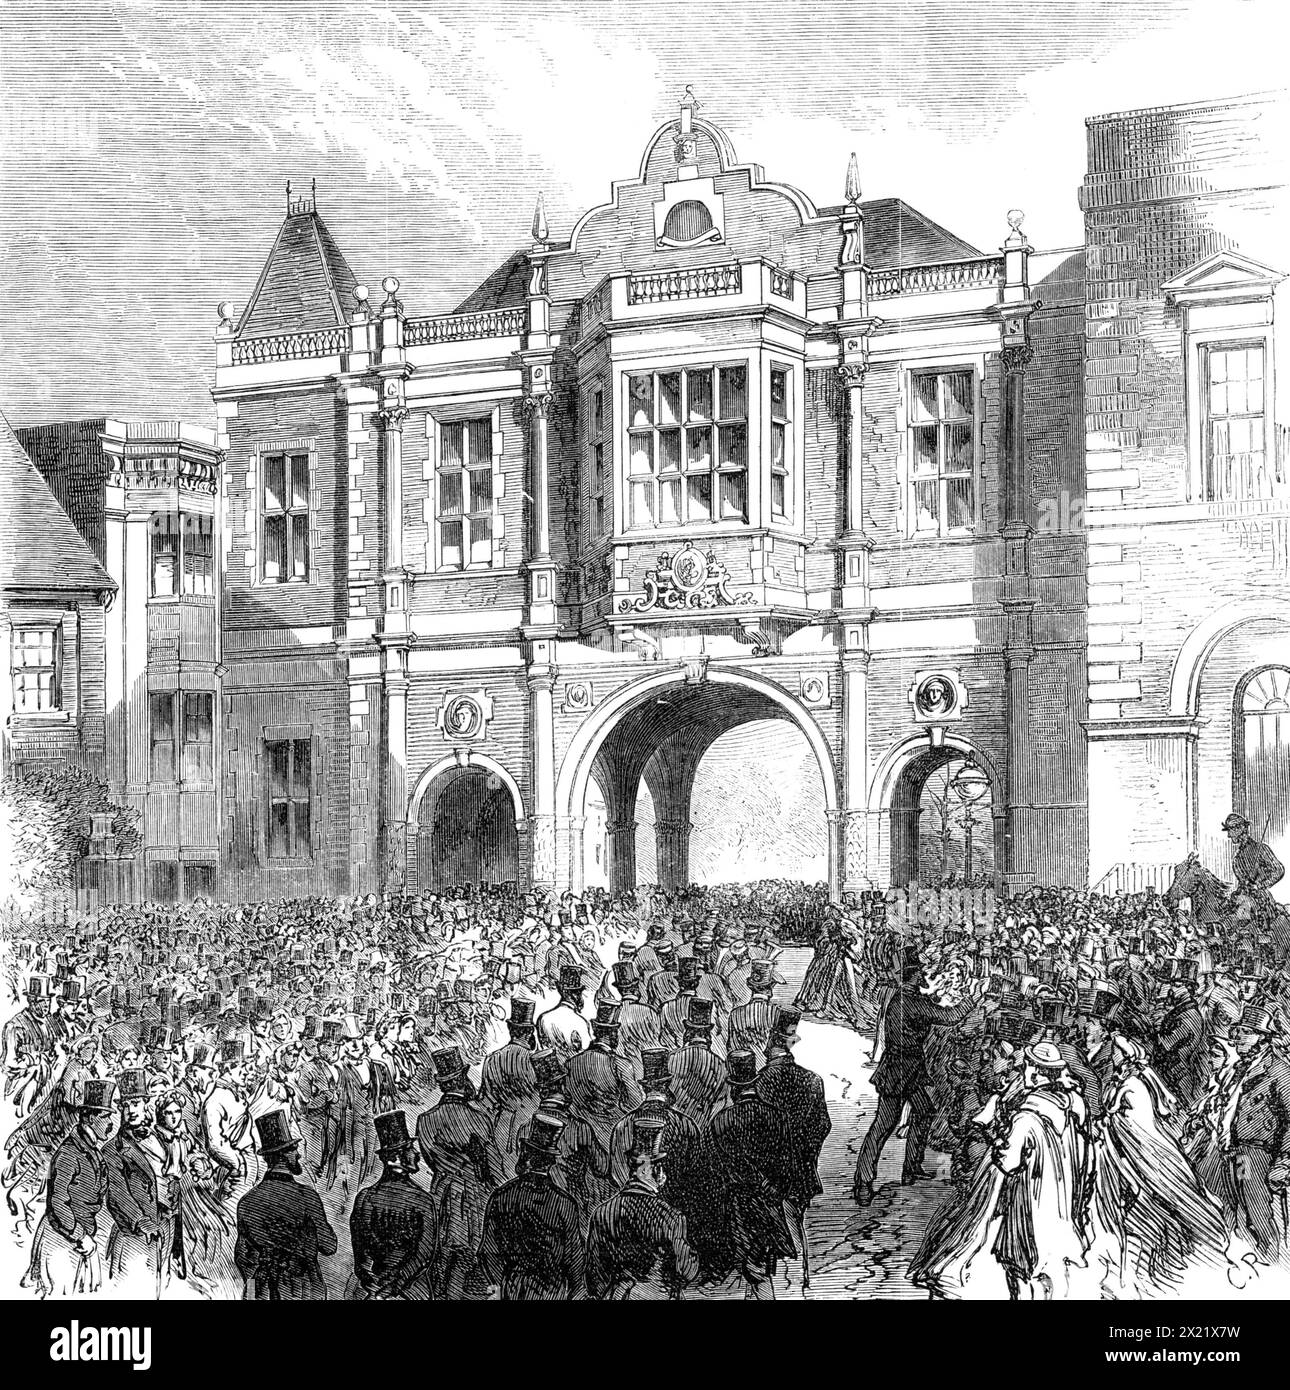 Opening of the new Corn Exchange at Aylesbury, 1865. 'The ceremony of opening the new Corn Exchange and Market-hall in the thriving town of Aylesbury took place on Wednesday week - the Right Hon. Lord Carington, Lord Lieutenant of Buckinghamshire, presiding...The site of the new Corn Exchange is in the old Market Square...The edifice, designed by Mr. D. Brandon, of Berkeley-square, is of the Elizabethan style of architecture ; the materials are red brick, with stone facings. The front, adjoining the County Hall, consists of three archways - one for carriages, the other two for foot passengers Stock Photo